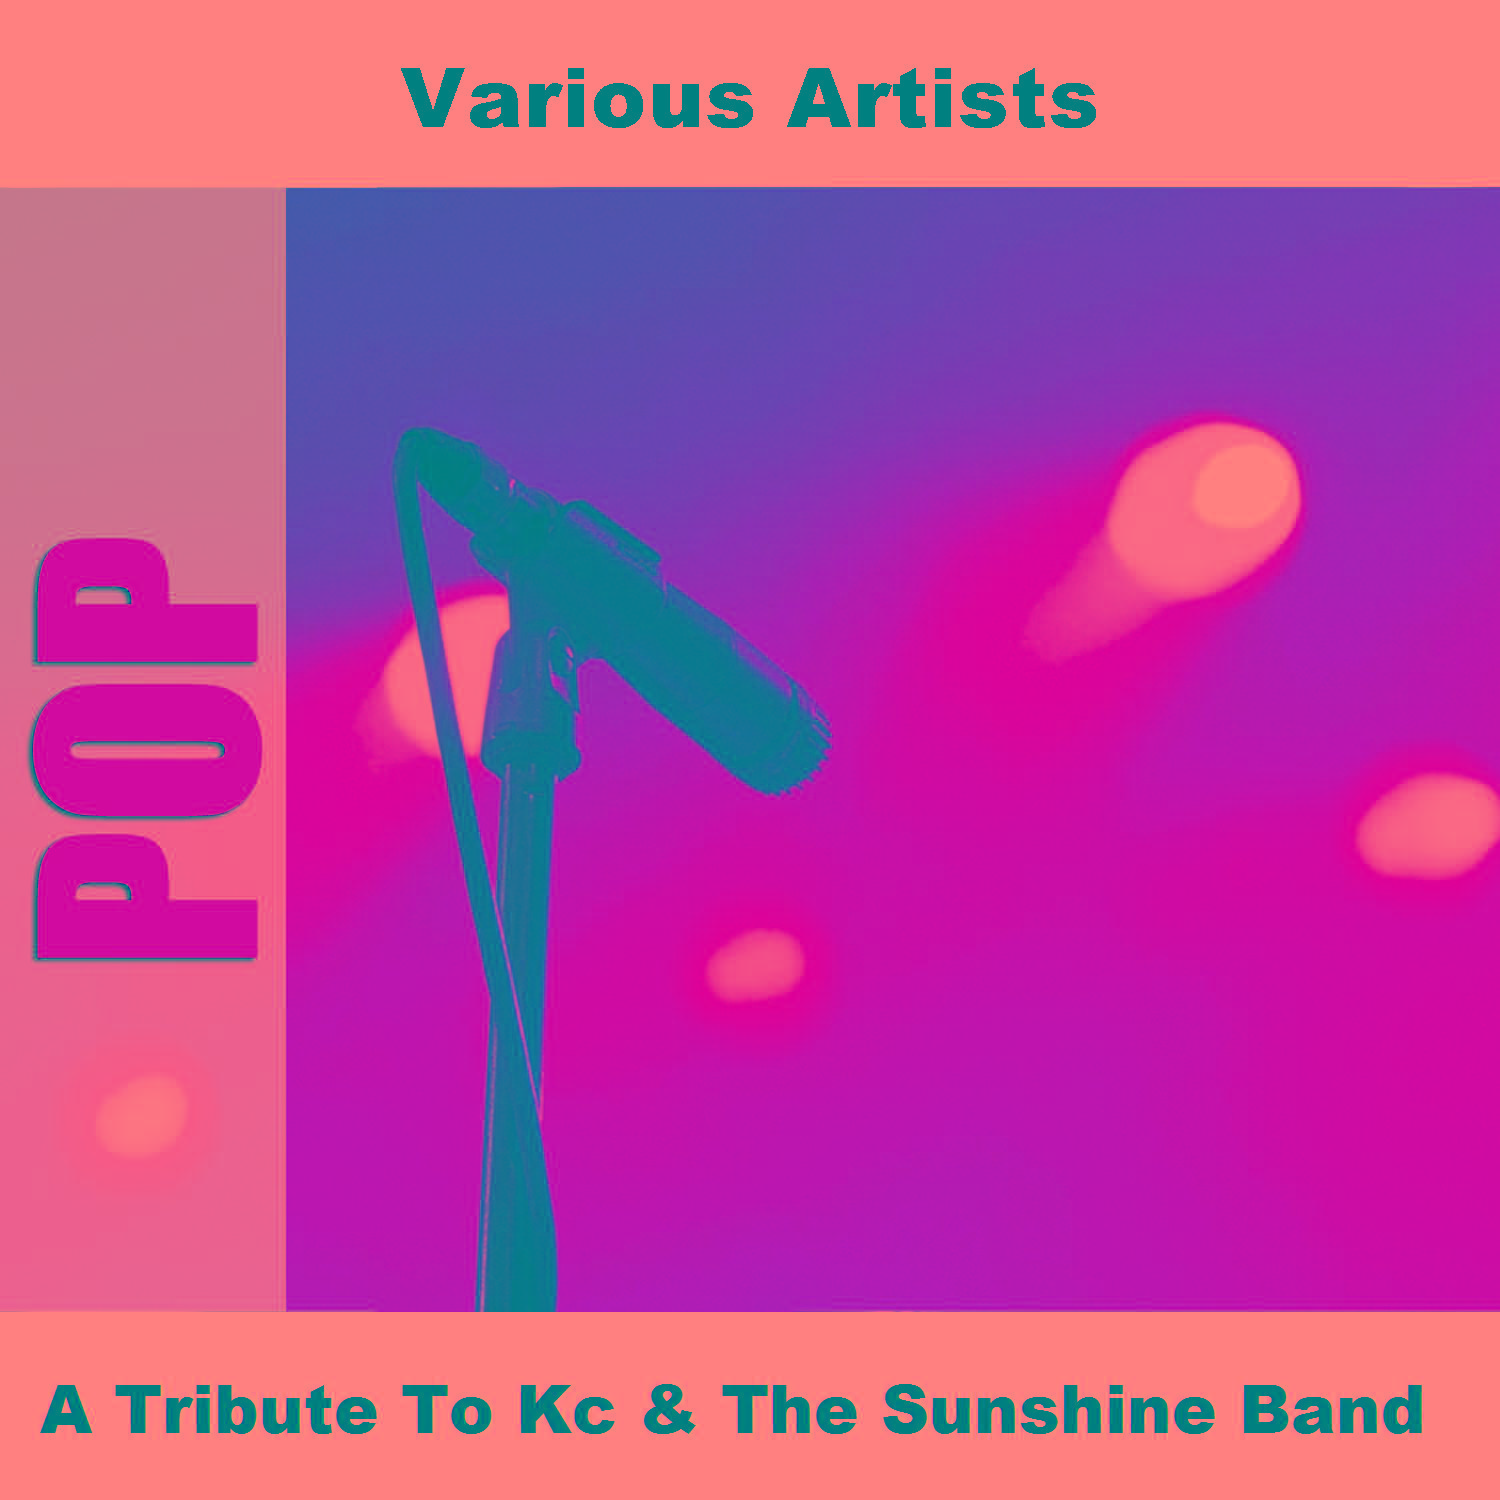 A Tribute To Kc & The Sunshine Band